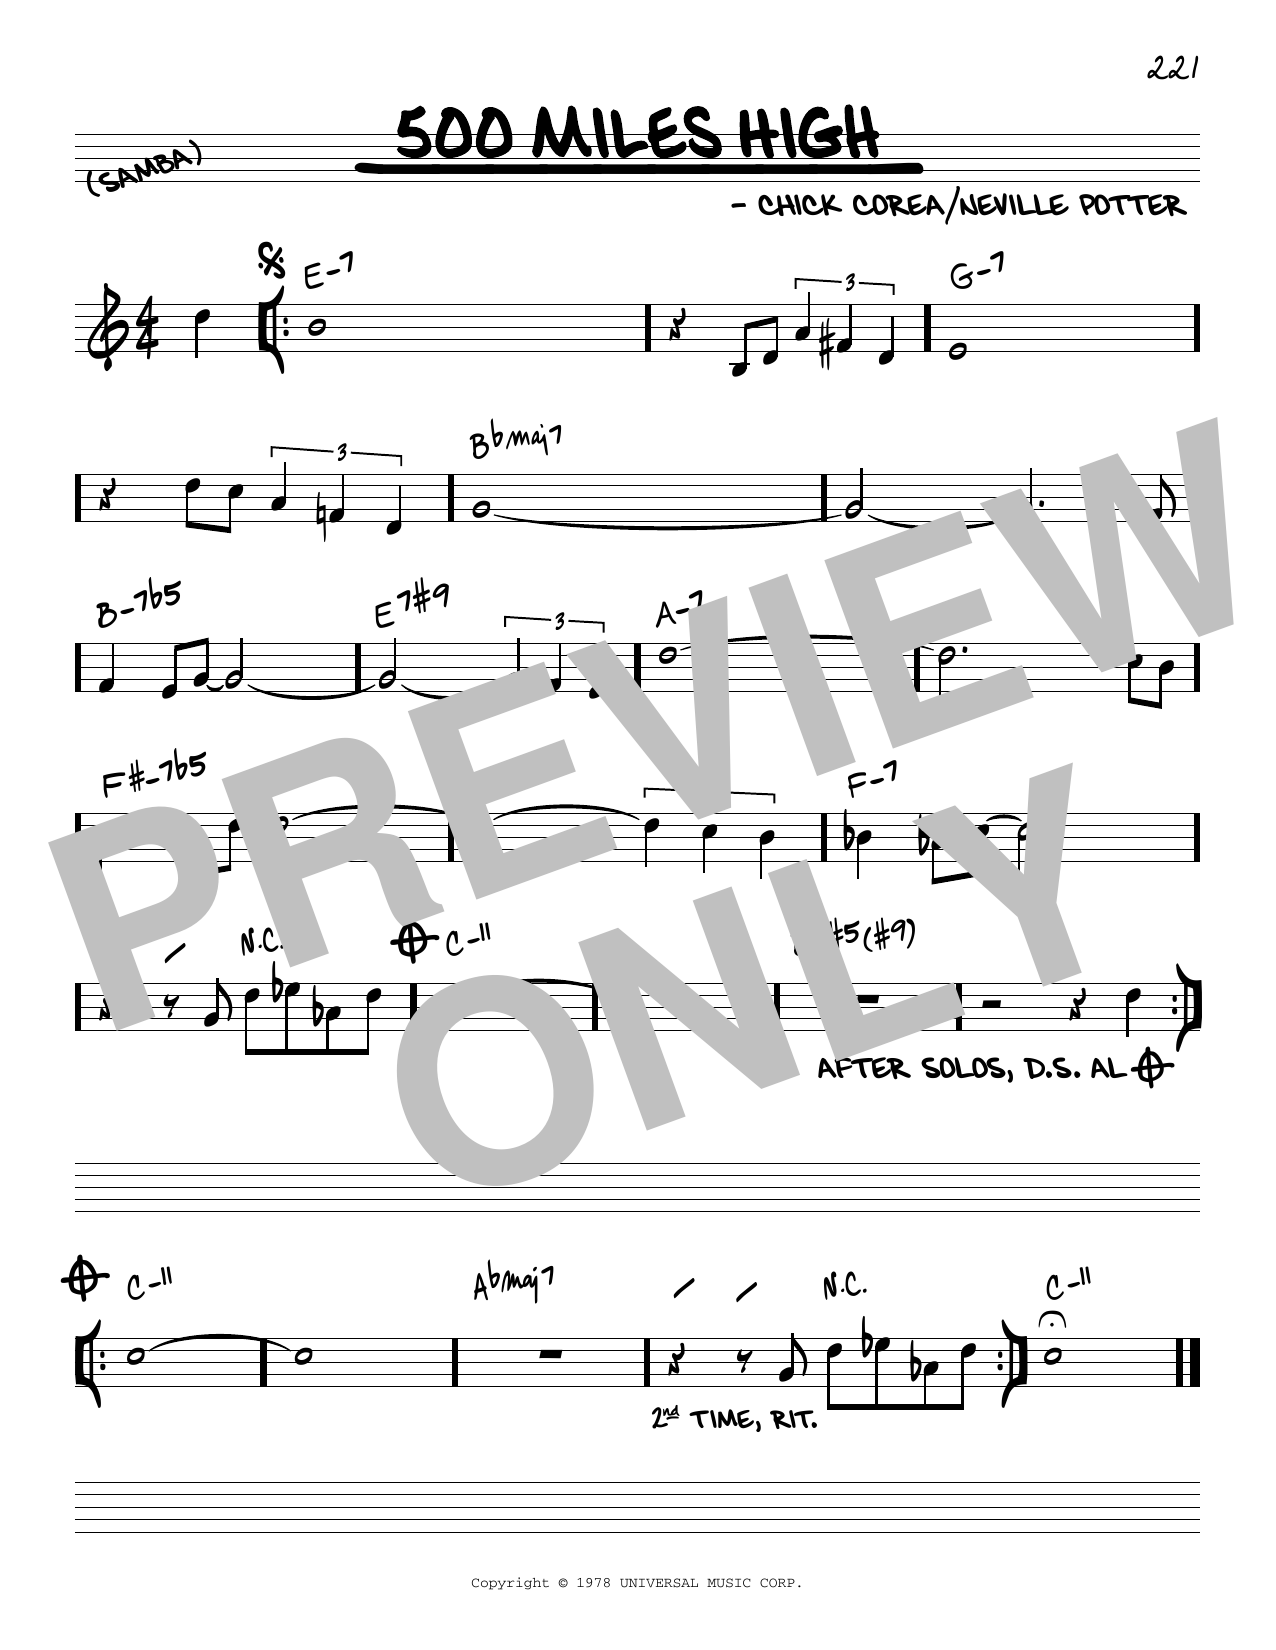 Download Chick Corea 500 Miles High Sheet Music